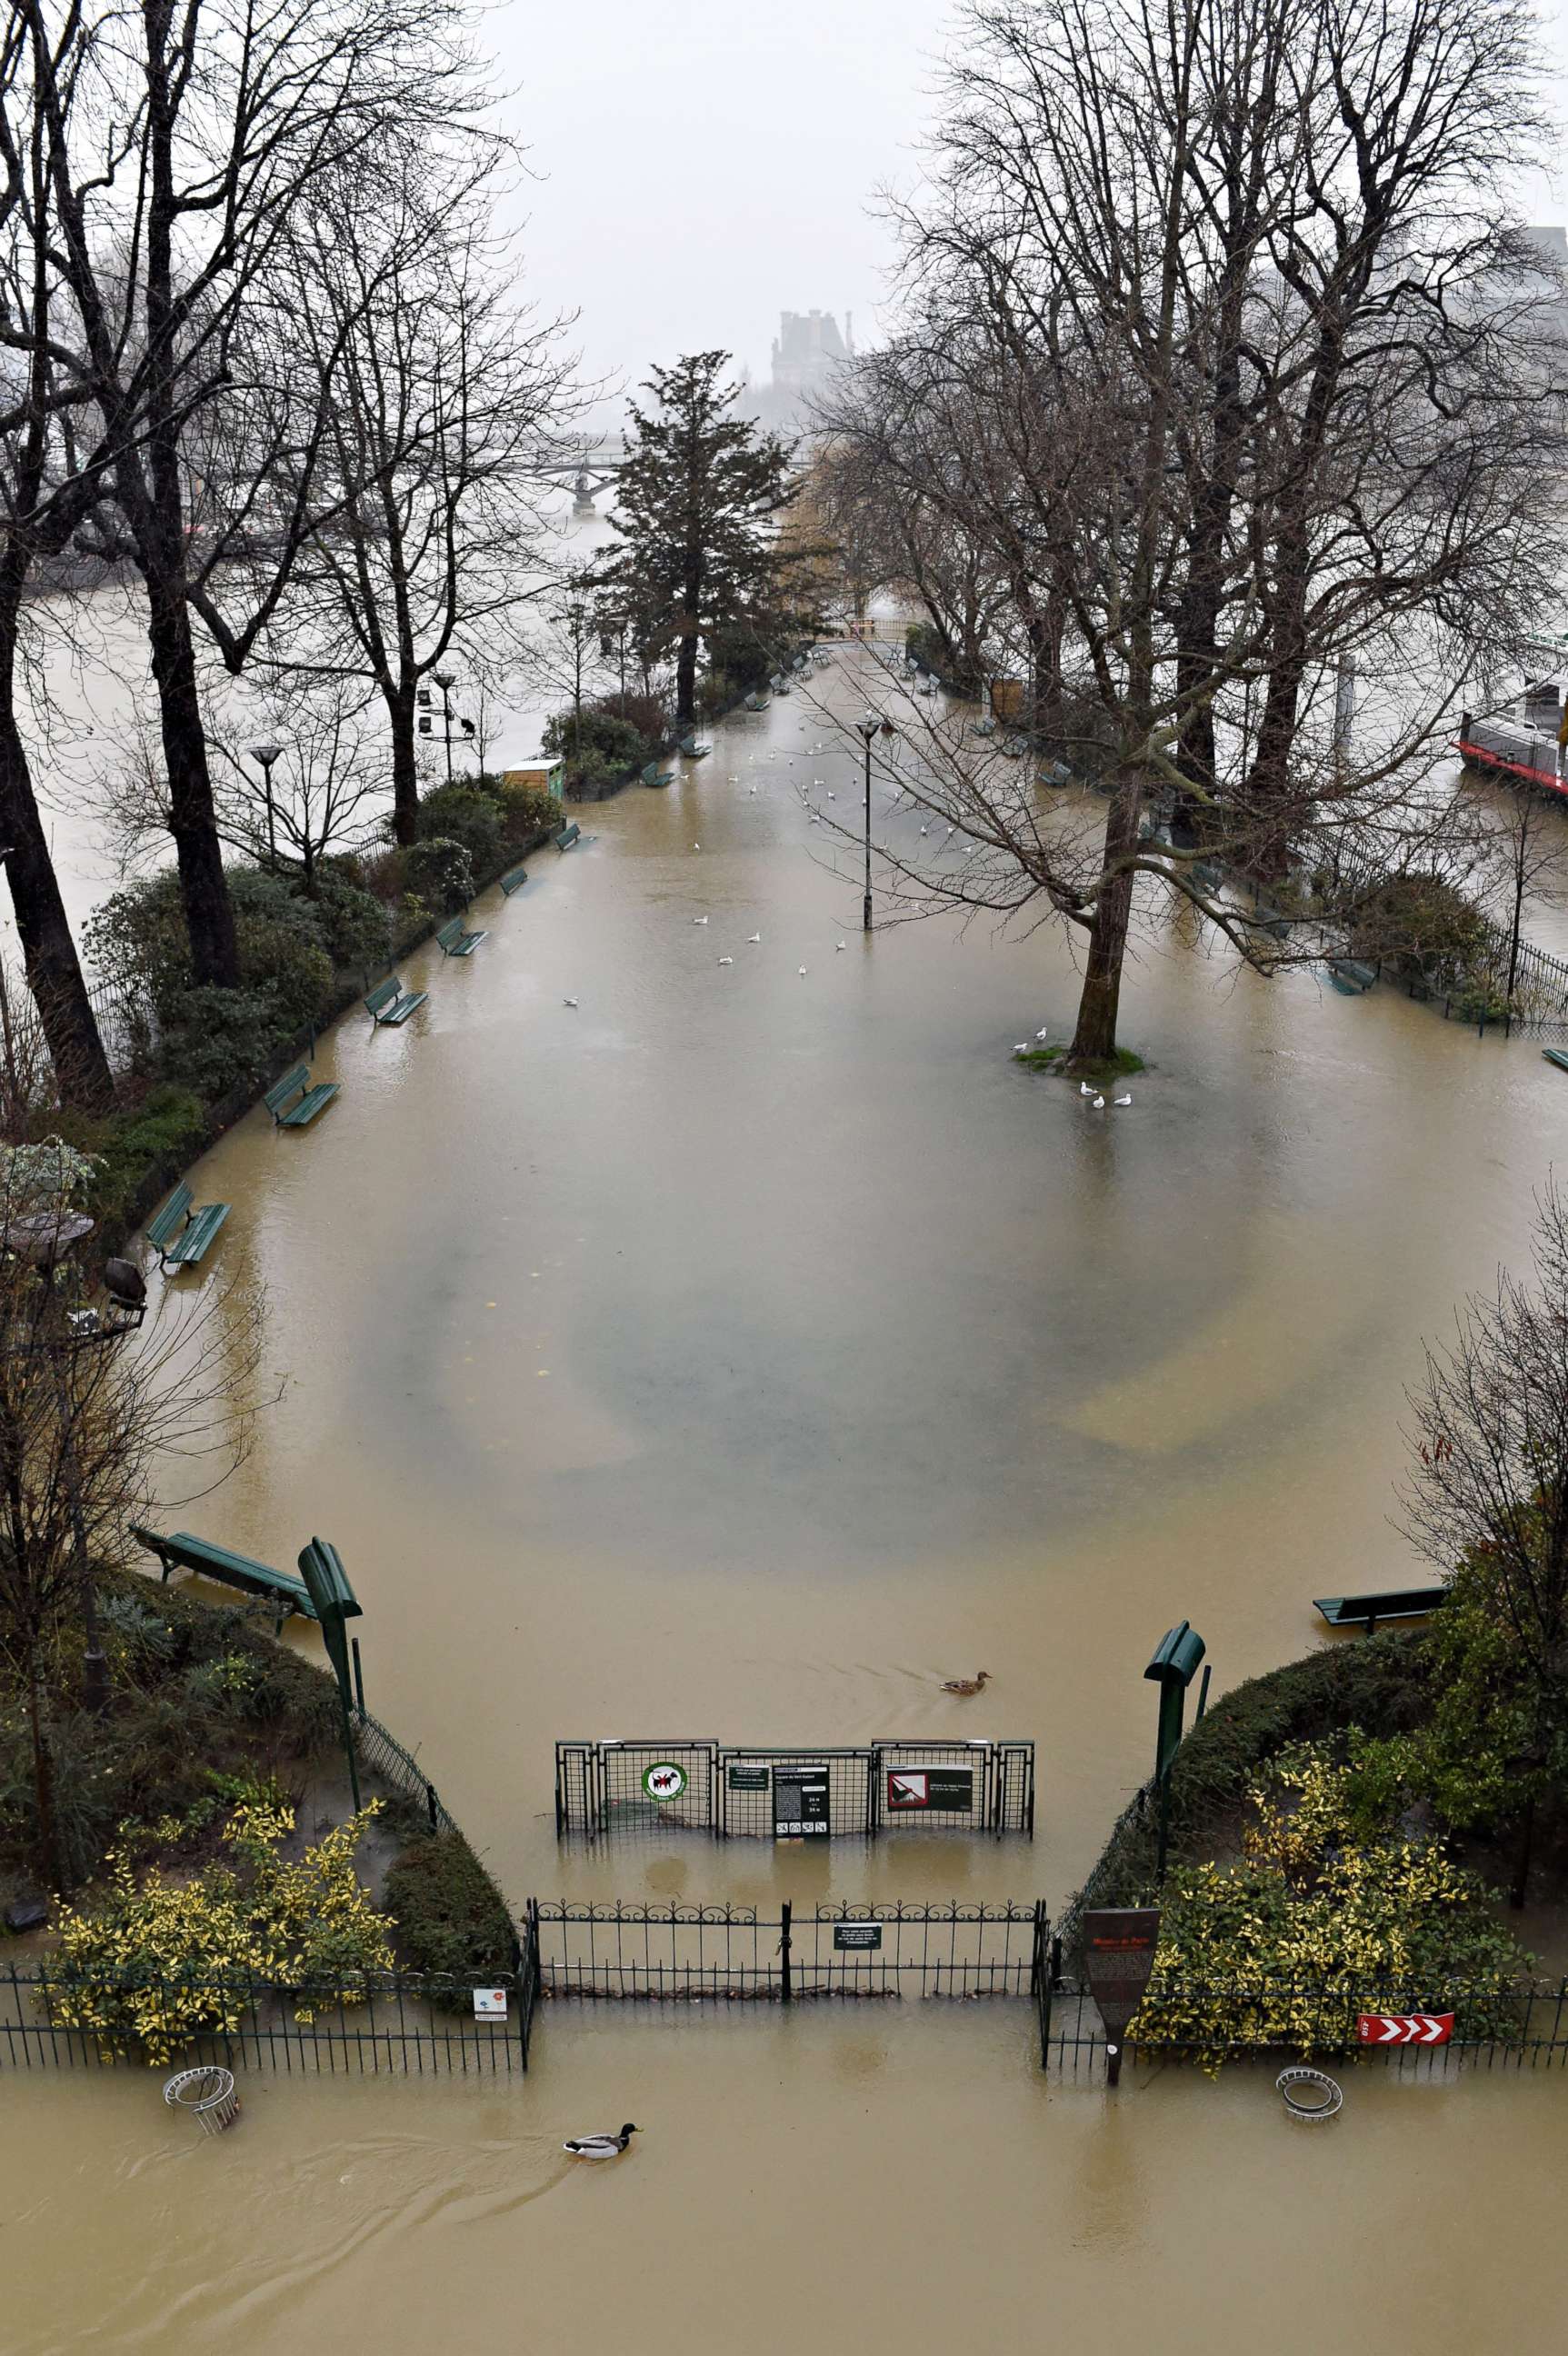 PHOTO: A flooded playground on the banks of the Seine river in Paris, Jan. 22, 2018. 